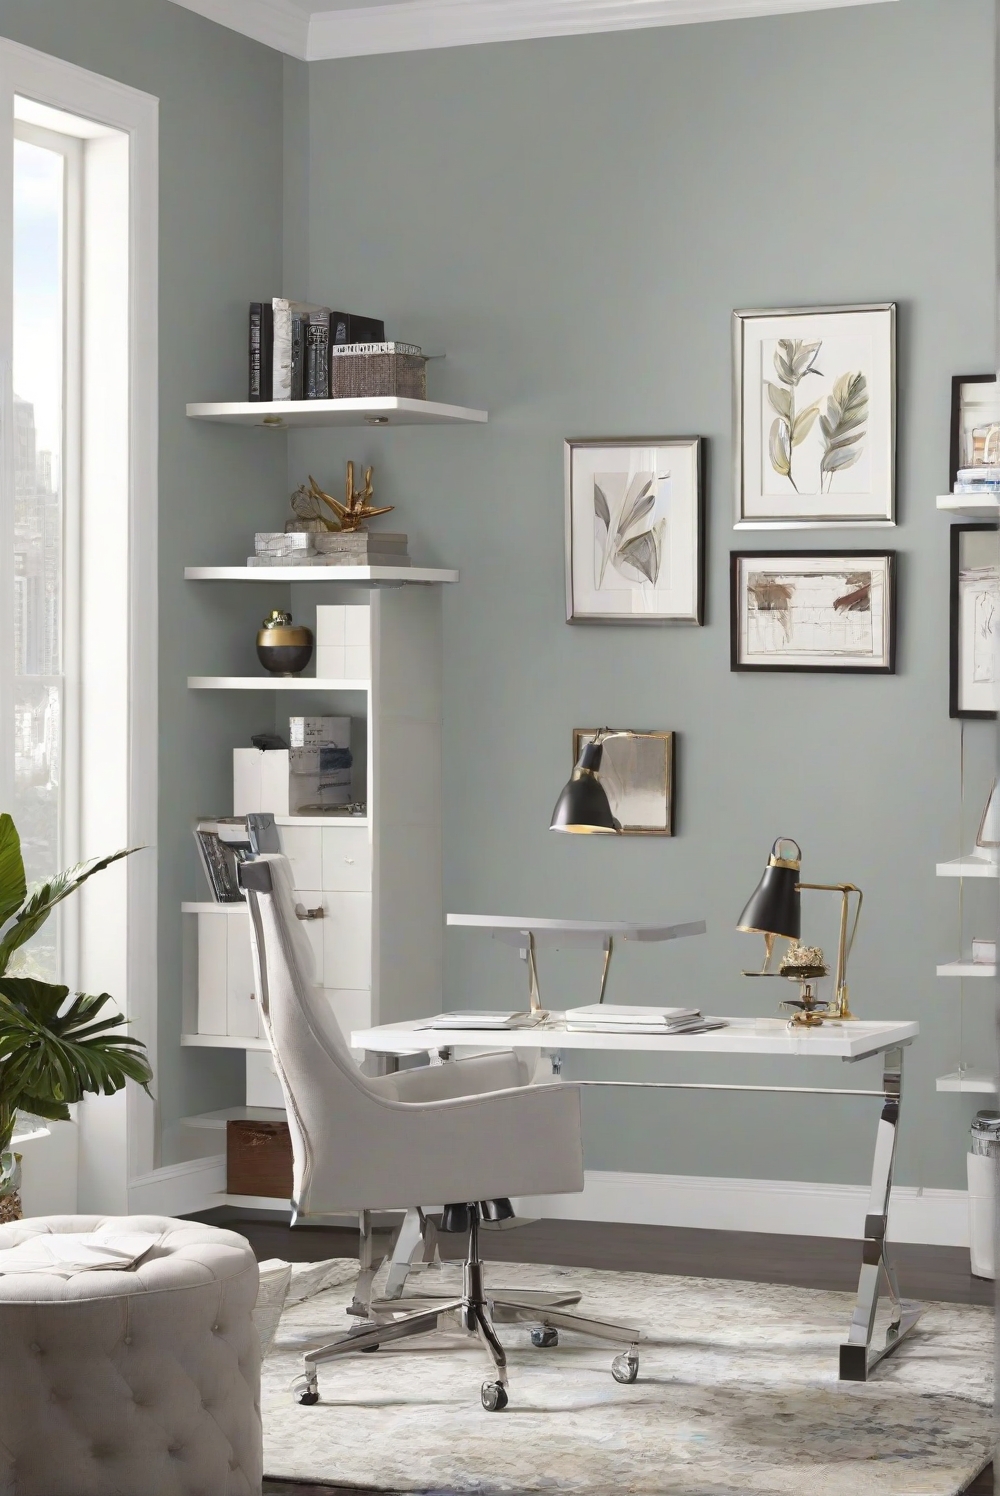 Balboa Mist, light gray, airy workspace, neutral paint colors, Refreshing decor, interior design ideas, professional painters